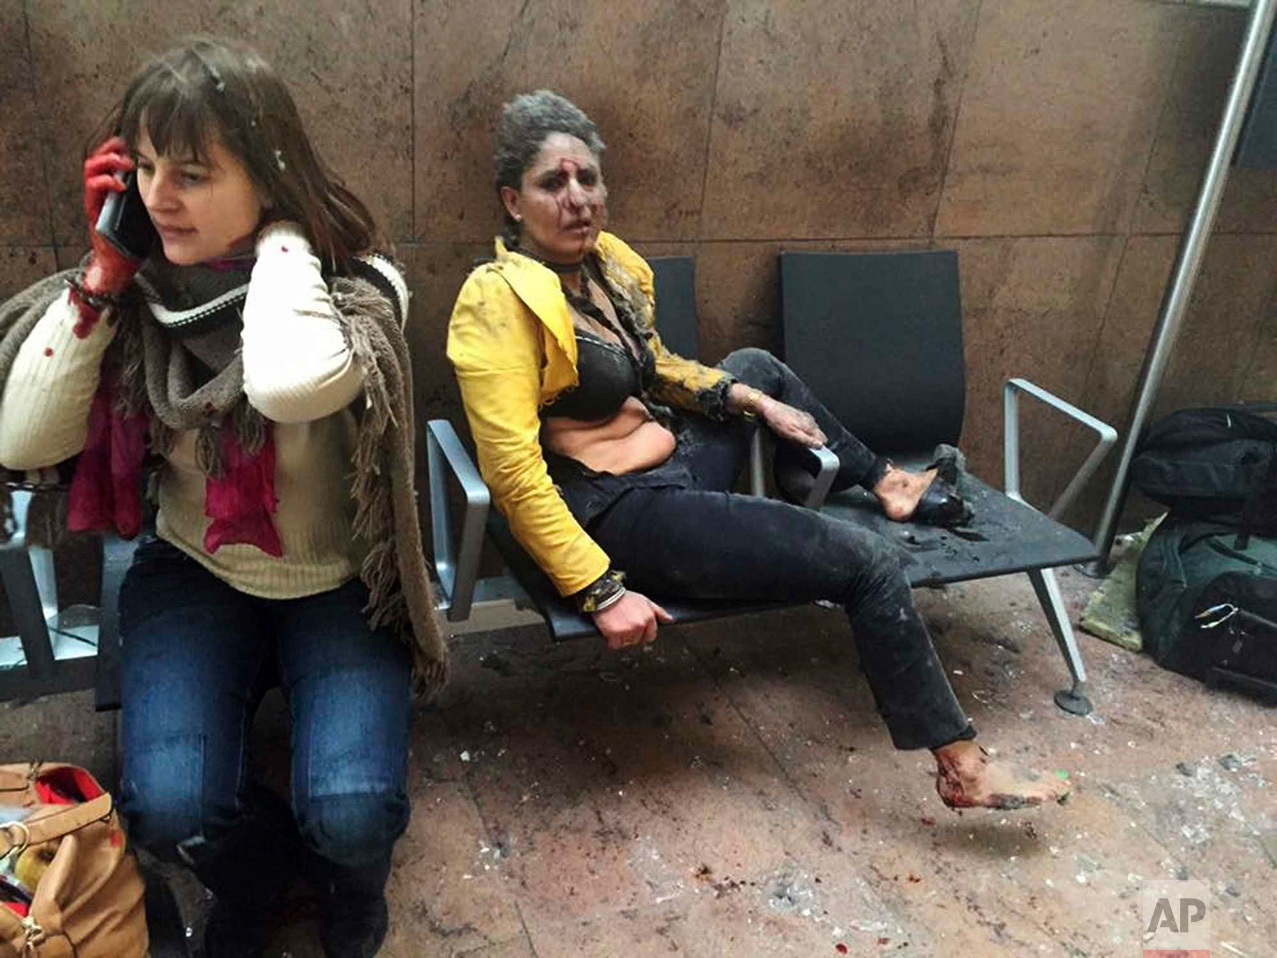  In this photo provided by Georgian Public Broadcaster and photographed by Ketevan Kardava, Nidhi Chaphekar, a 40-year-old Jet Airways flight attendant from Mumbai, right, and another unidentified woman are shown after being wounded in Brussels Airpo